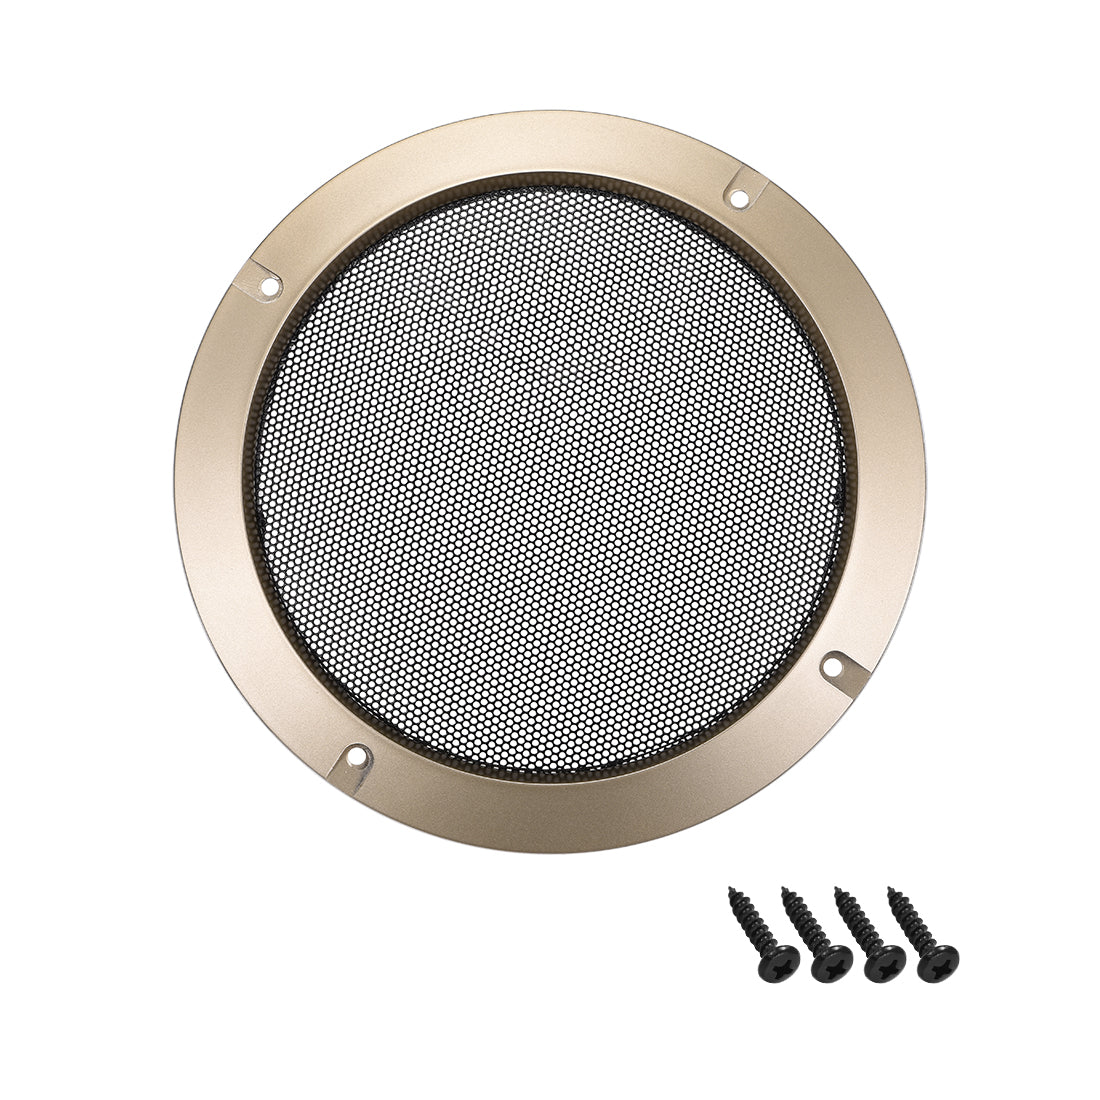 uxcell Uxcell 8" Speaker Grill Mesh Decorative Circle Subwoofer Guard Protector Cover Audio Accessories